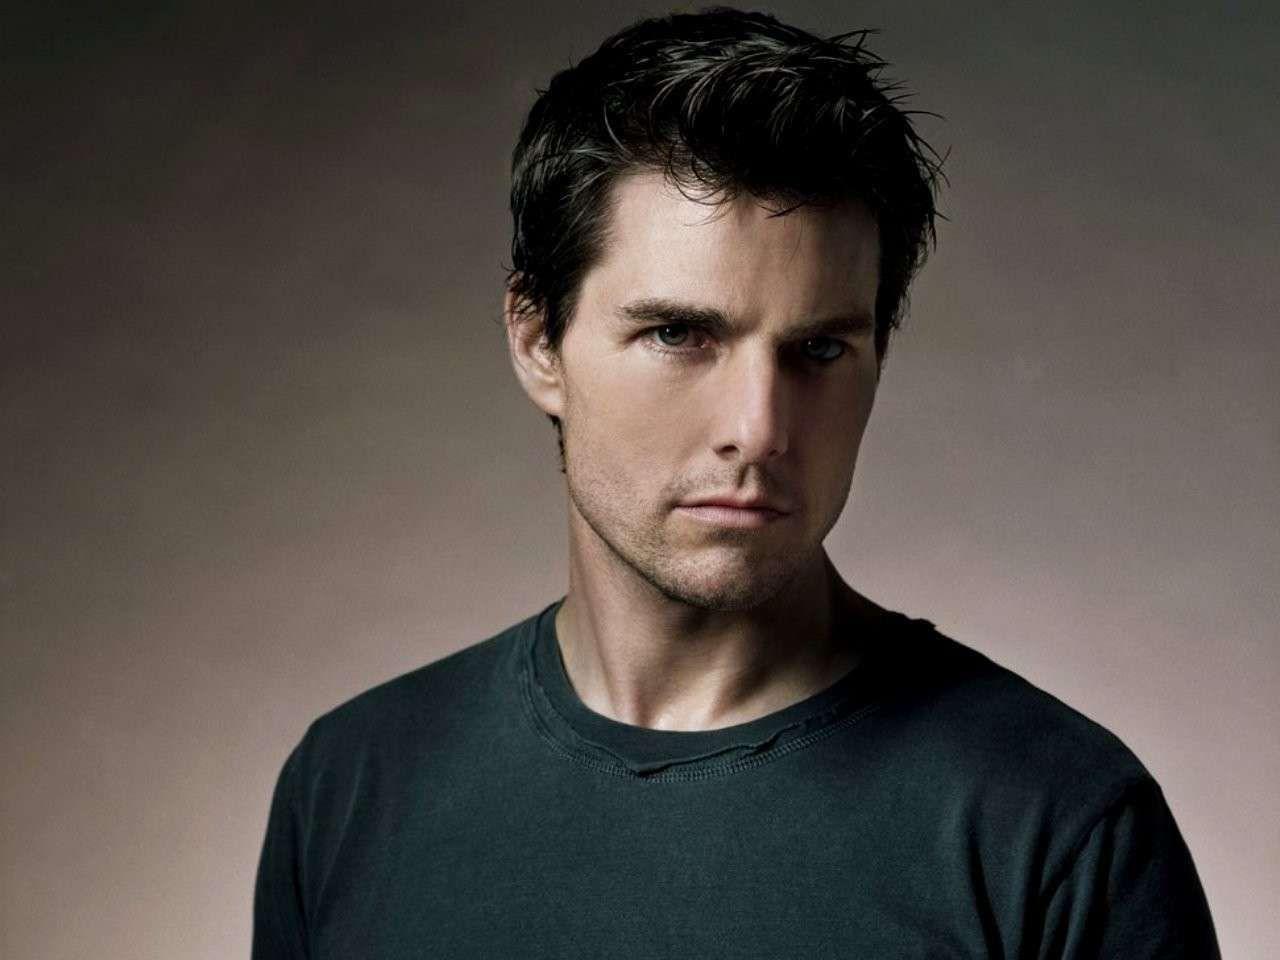 Tom Cruise HD Wallpaper download latest Tom Cruise HD Wallpaper for Computer, Mobile, iPhone, iPad or any. Tom cruise short, Tom cruise, Celebrities male